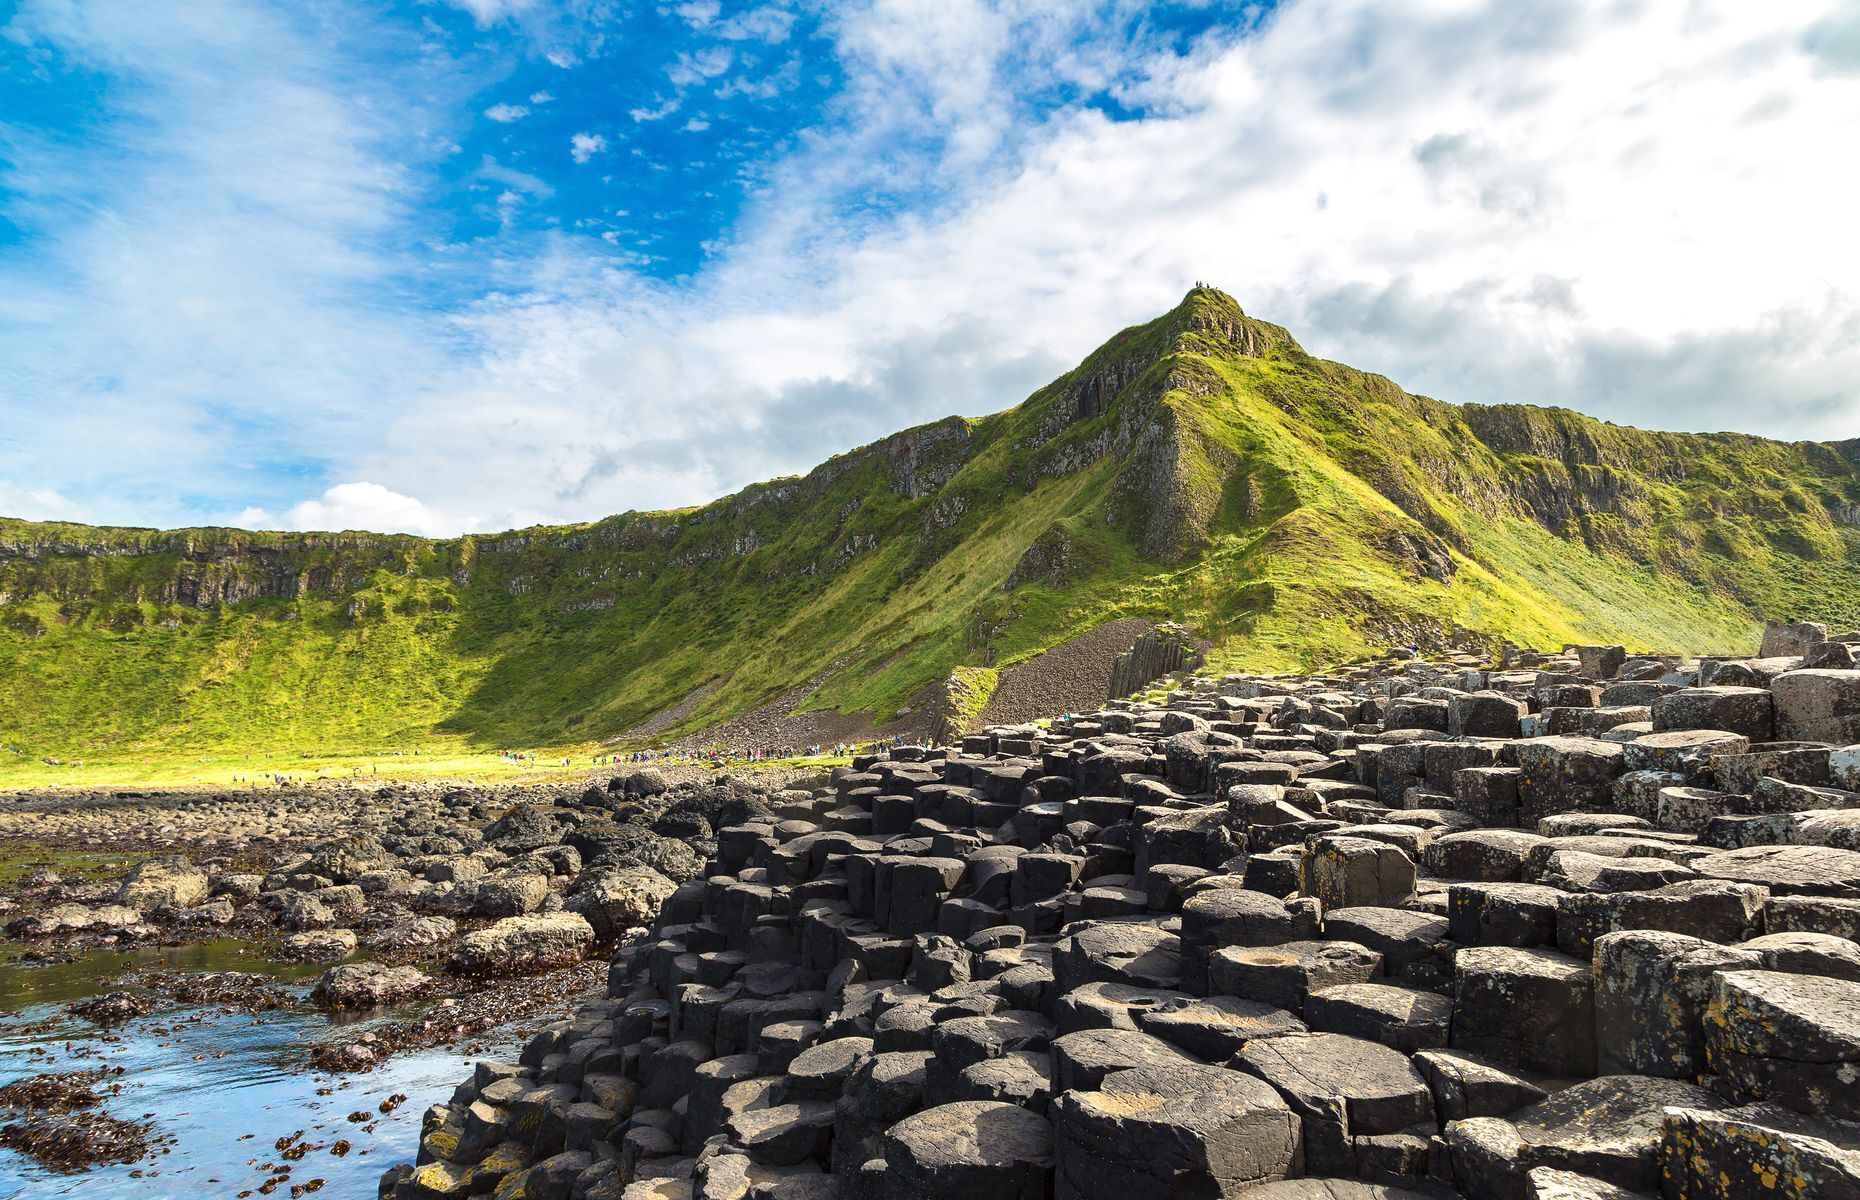 <p>If your trip includes a foray into Northern Ireland, be sure to stop by the <a href="https://www.ireland.com/en-us/things-to-do/attractions/giants-causeway/" rel="noreferrer noopener">Giant’s Causeway</a>. Listed as a UNESCO World Heritage Site, this impressive volcanic formation is made up of more than 40,000 interlocking basalt columns and has been fascinating tourists from all over the world.</p>